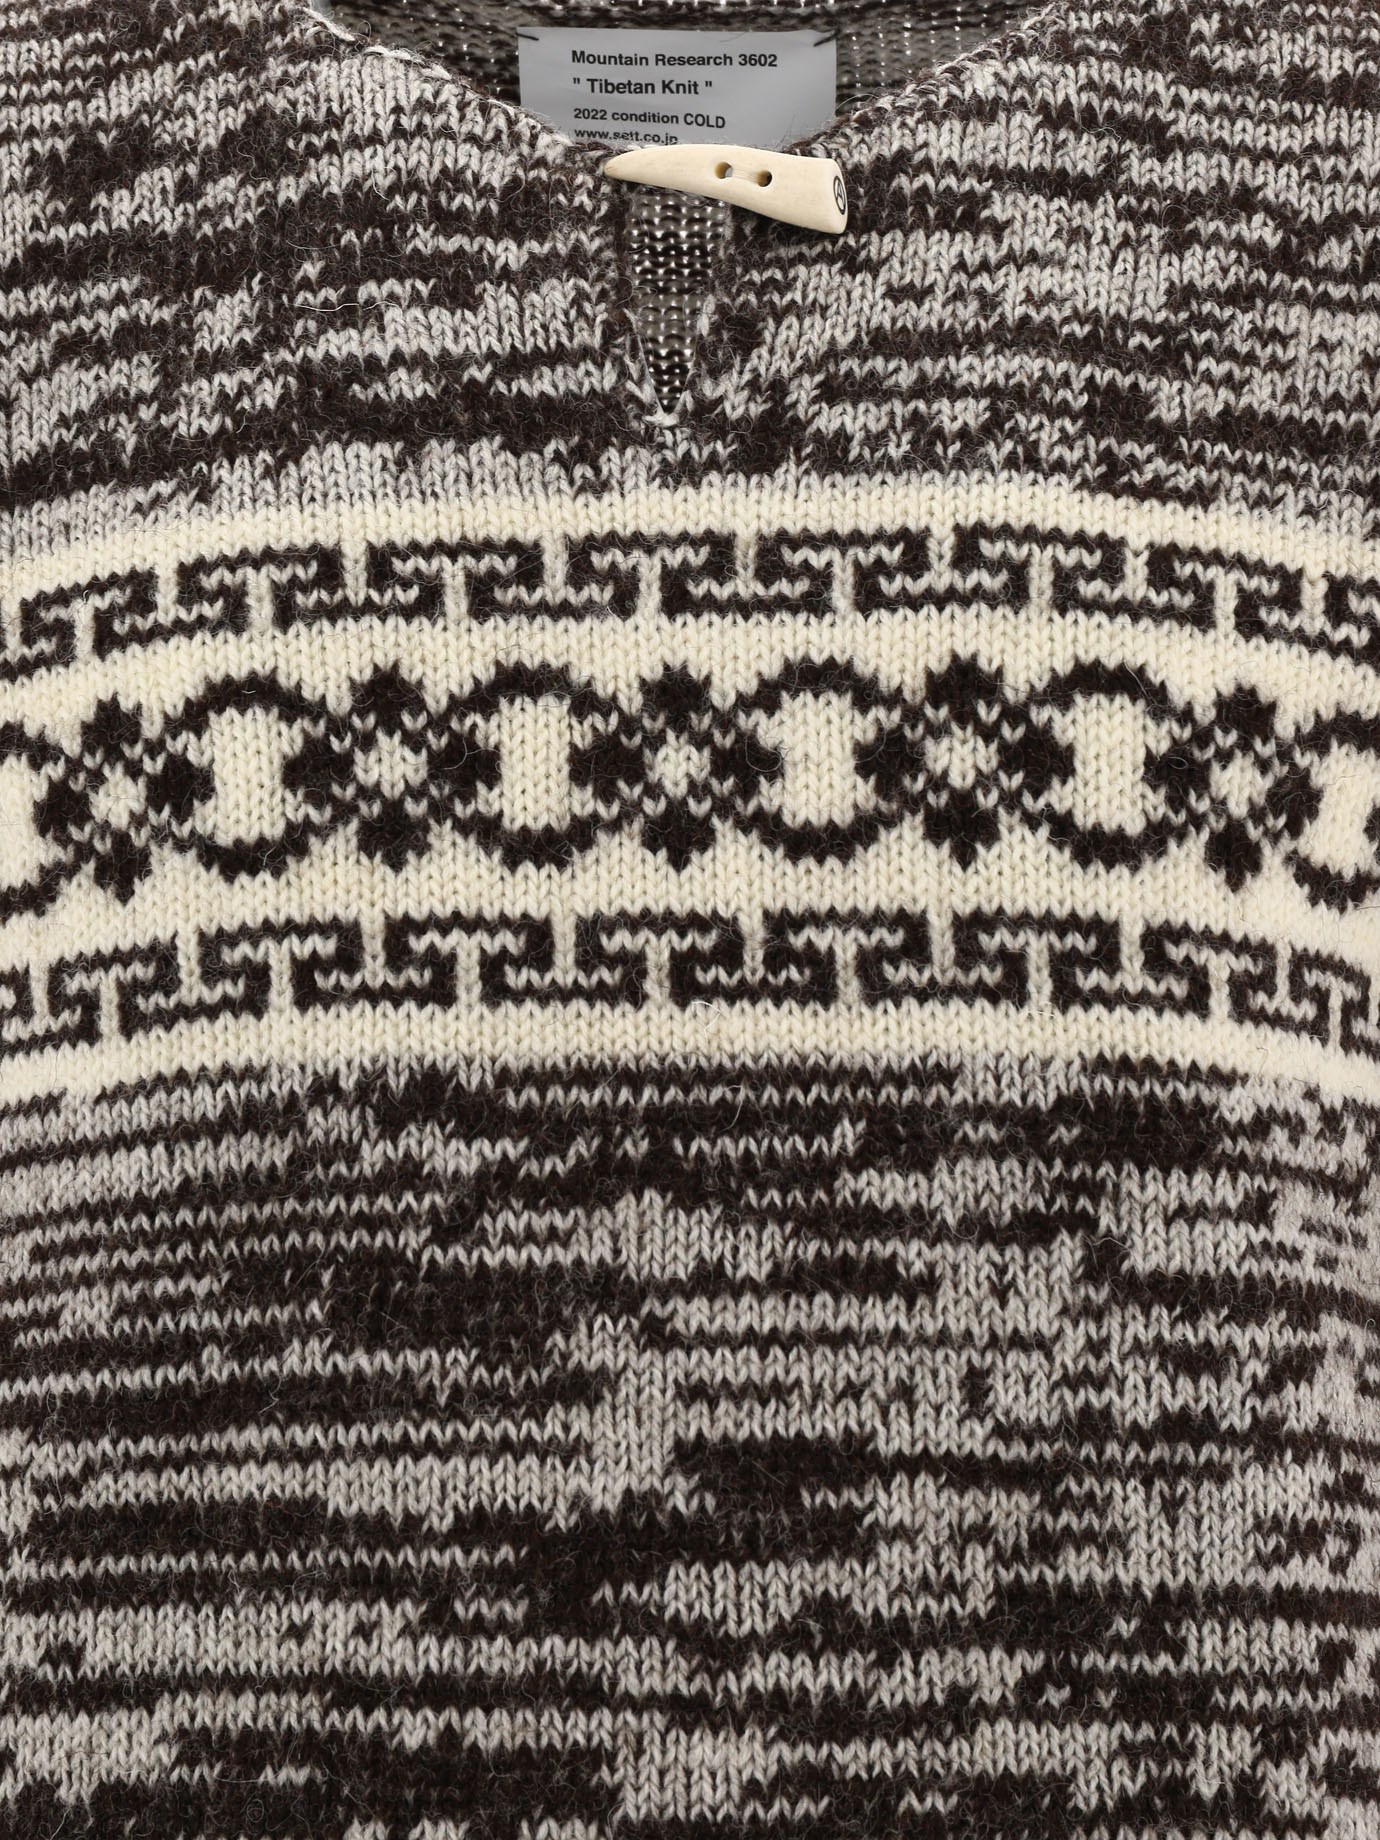 Maglione  Tibetan Knit  by Mountain Research